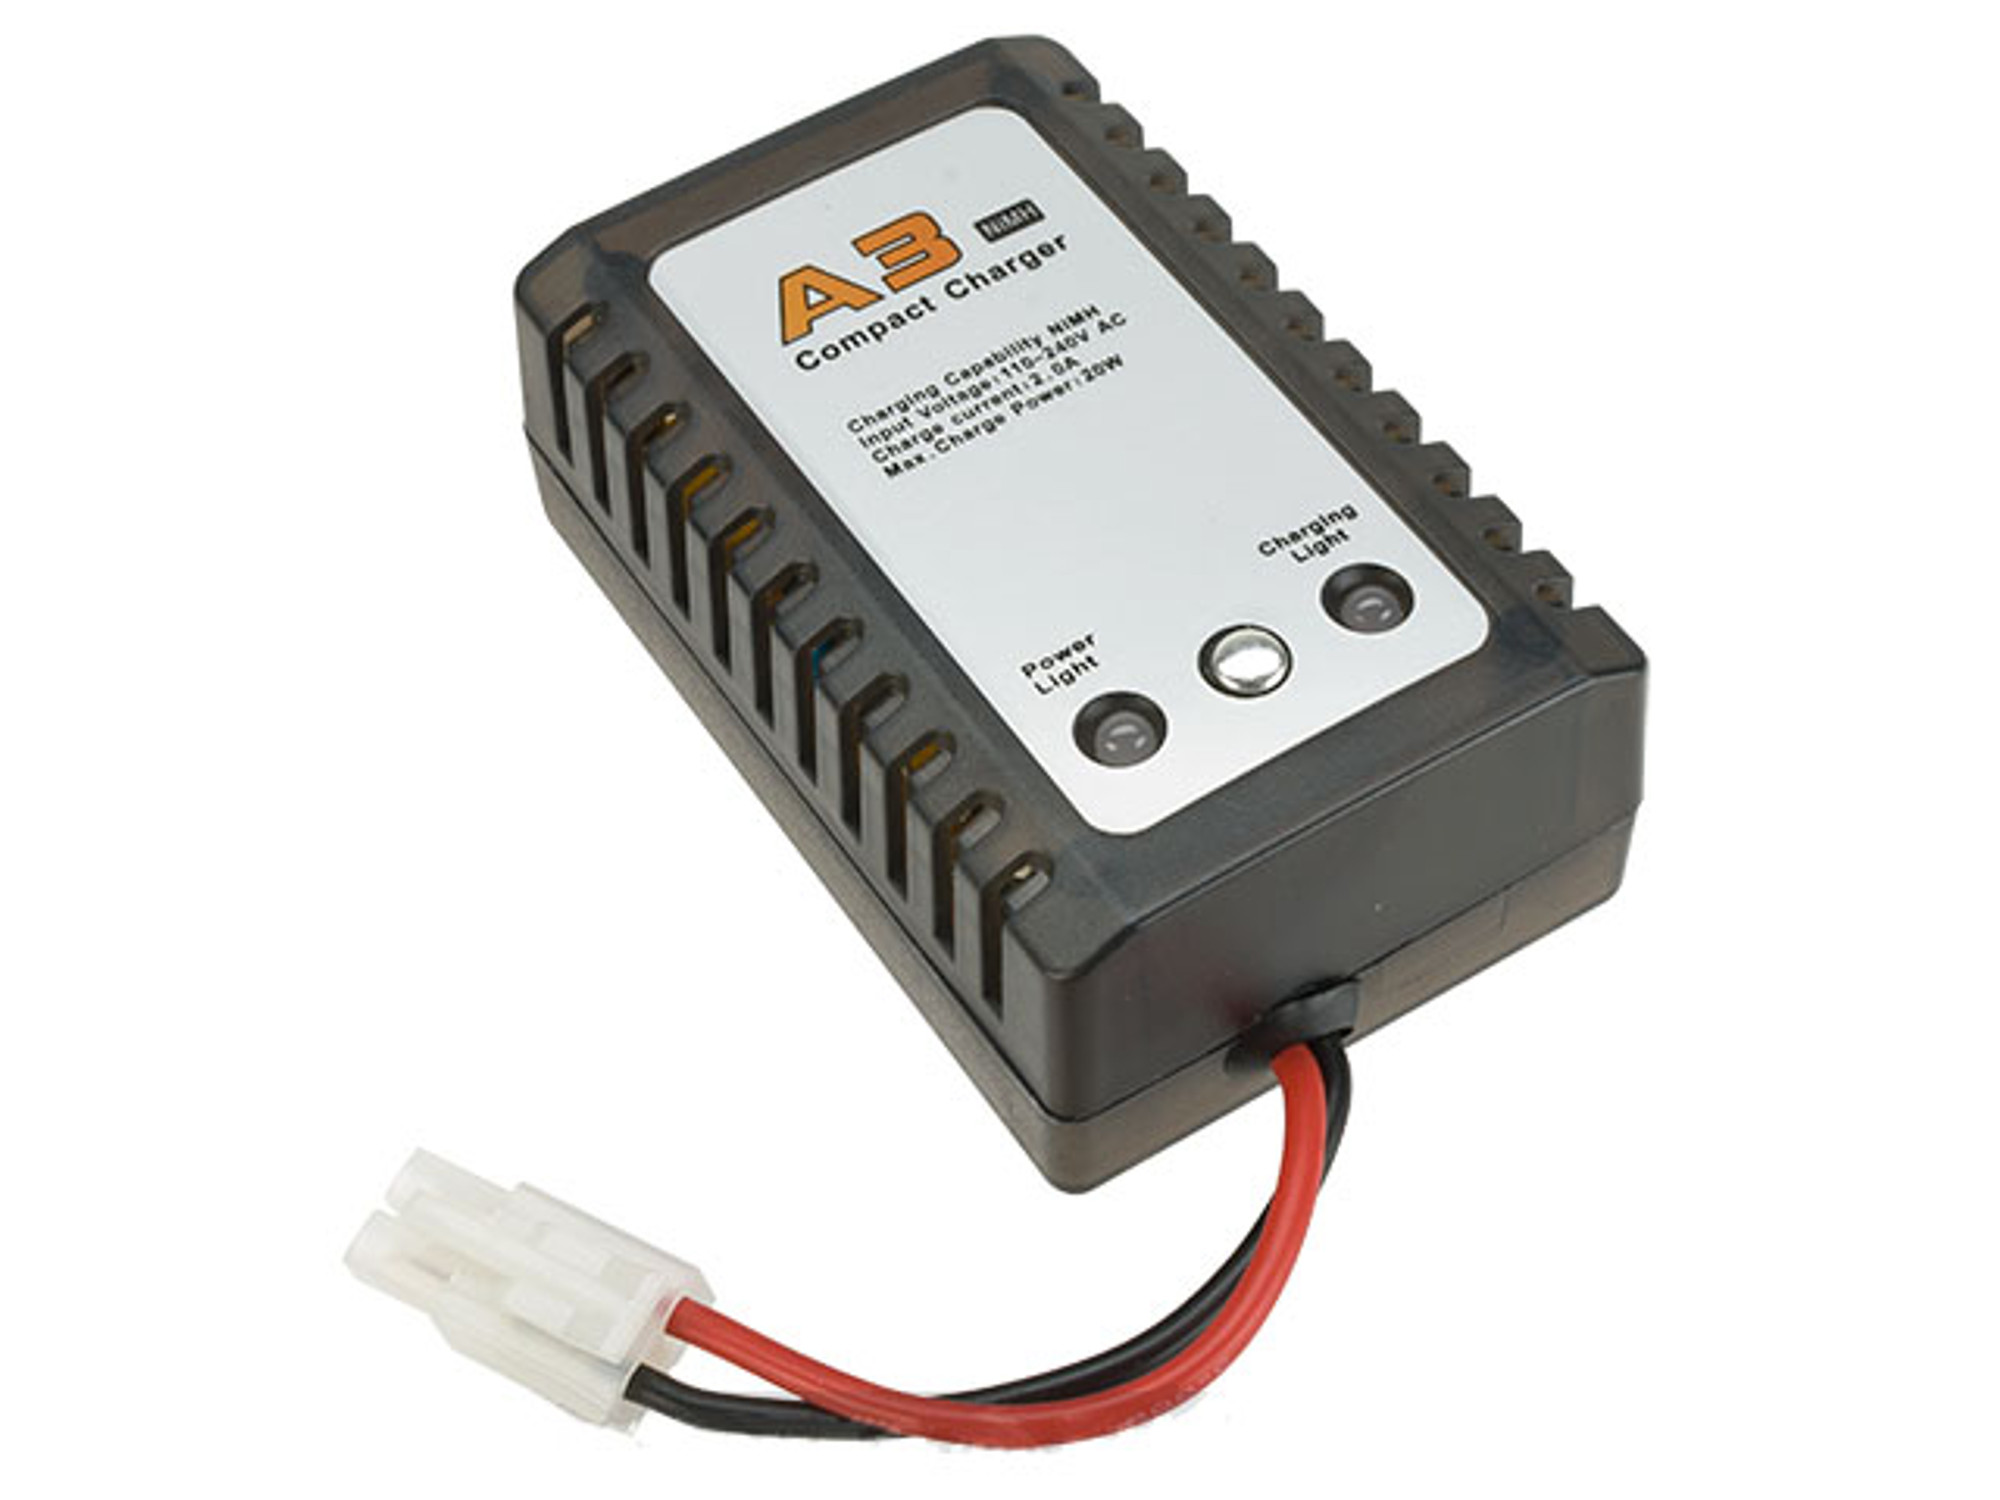 WE-Tech A3 Compact Charger for NiMh Batteries with 6-8 Cells